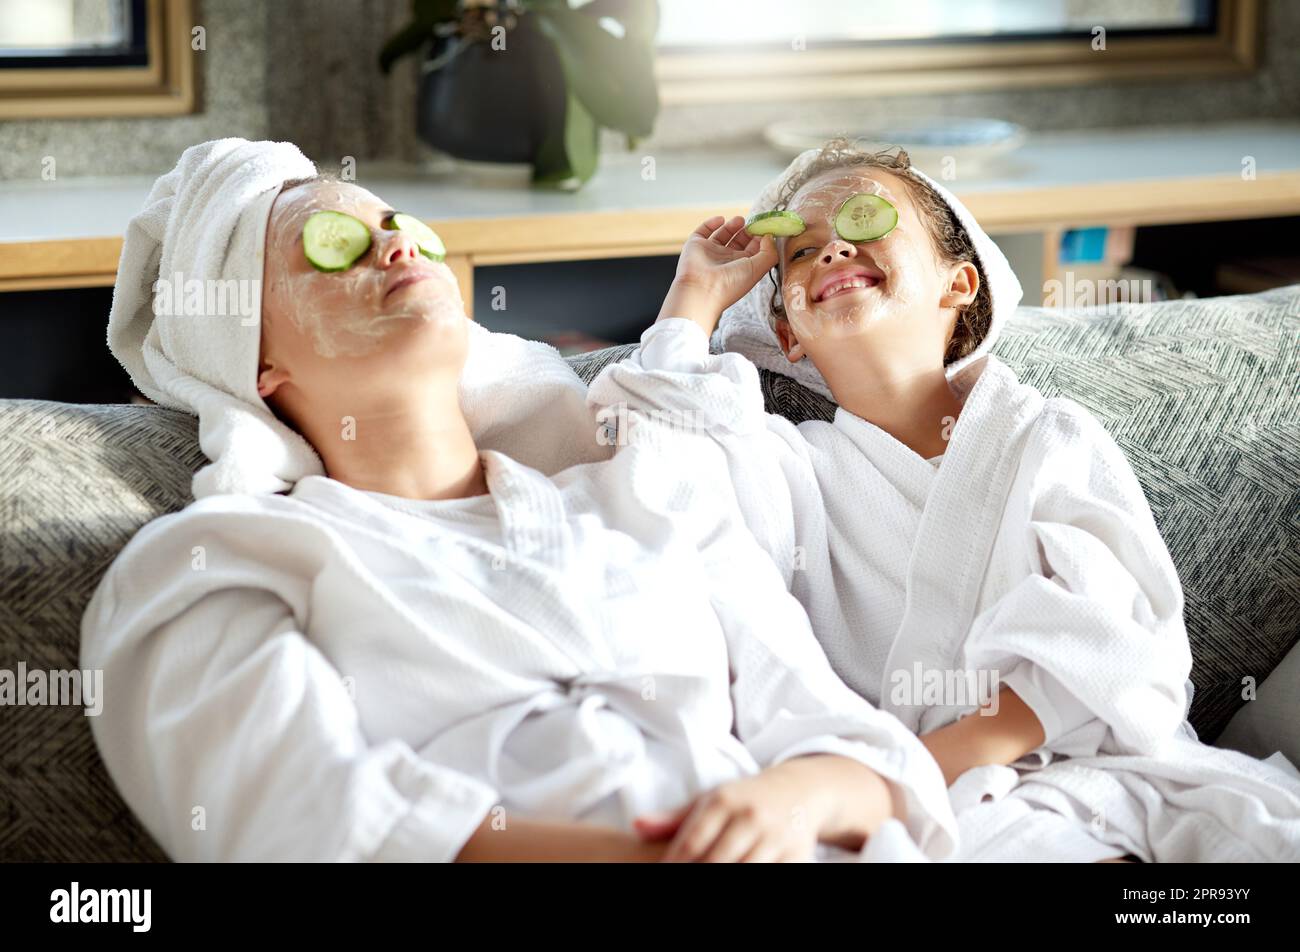 Fresh skincare, face mask and healthy skin treatment for bonding mother and daughter home spa day. Fun, smiling and playful child and parent relaxing with cucumber over their eyes in grooming routine Stock Photo